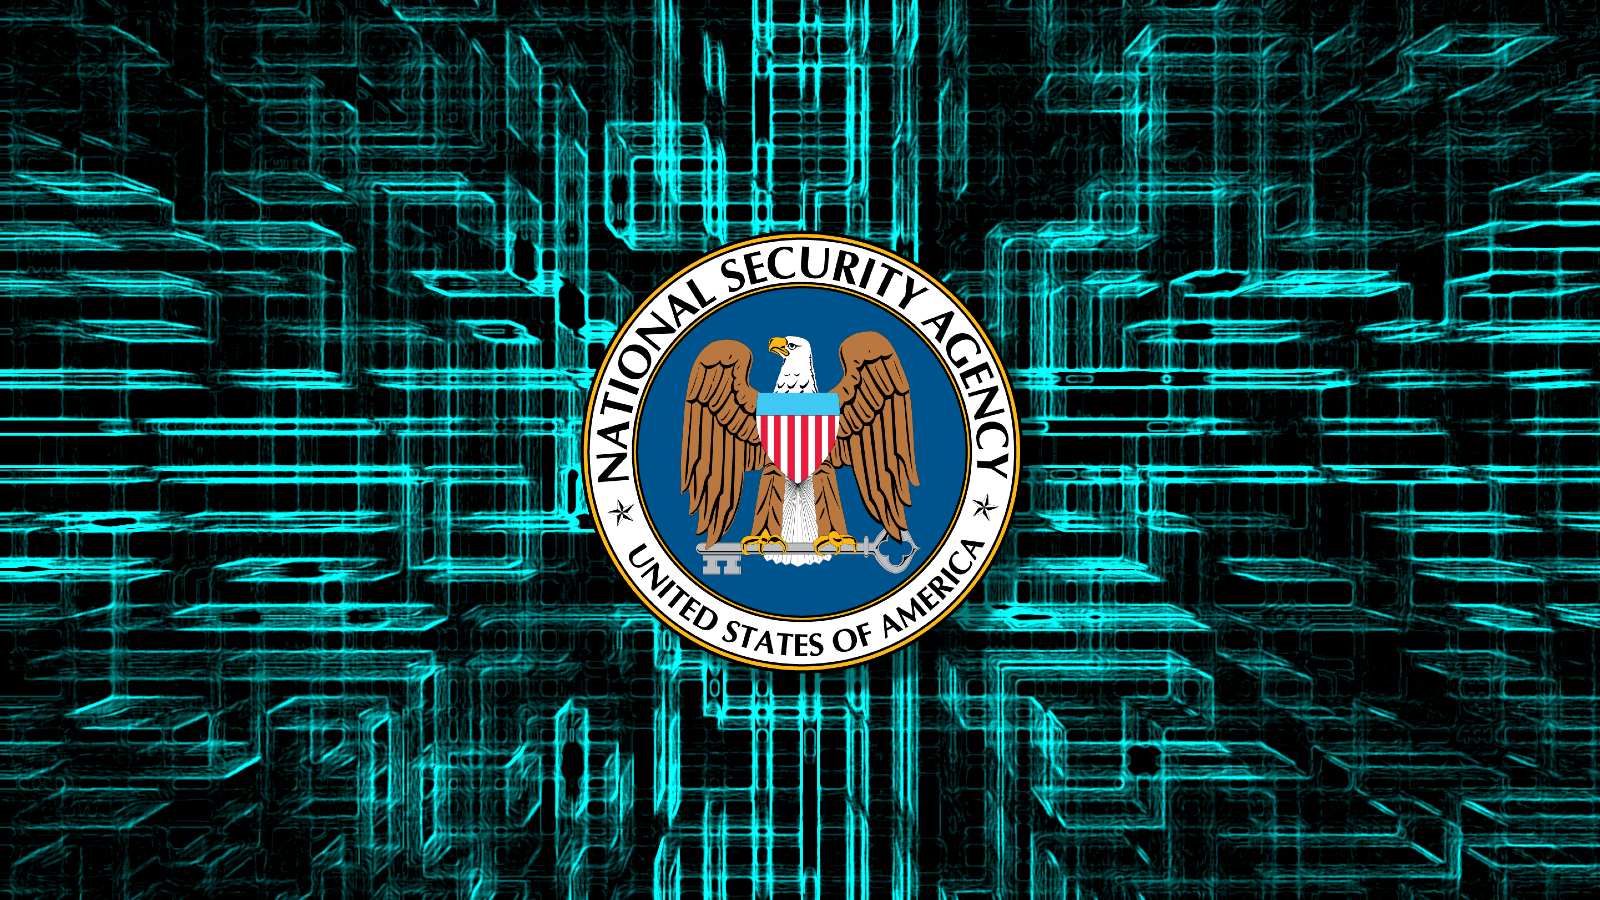 NSA Confirms Purchase Of Americans’ Internet Browsing Records Without Warrant